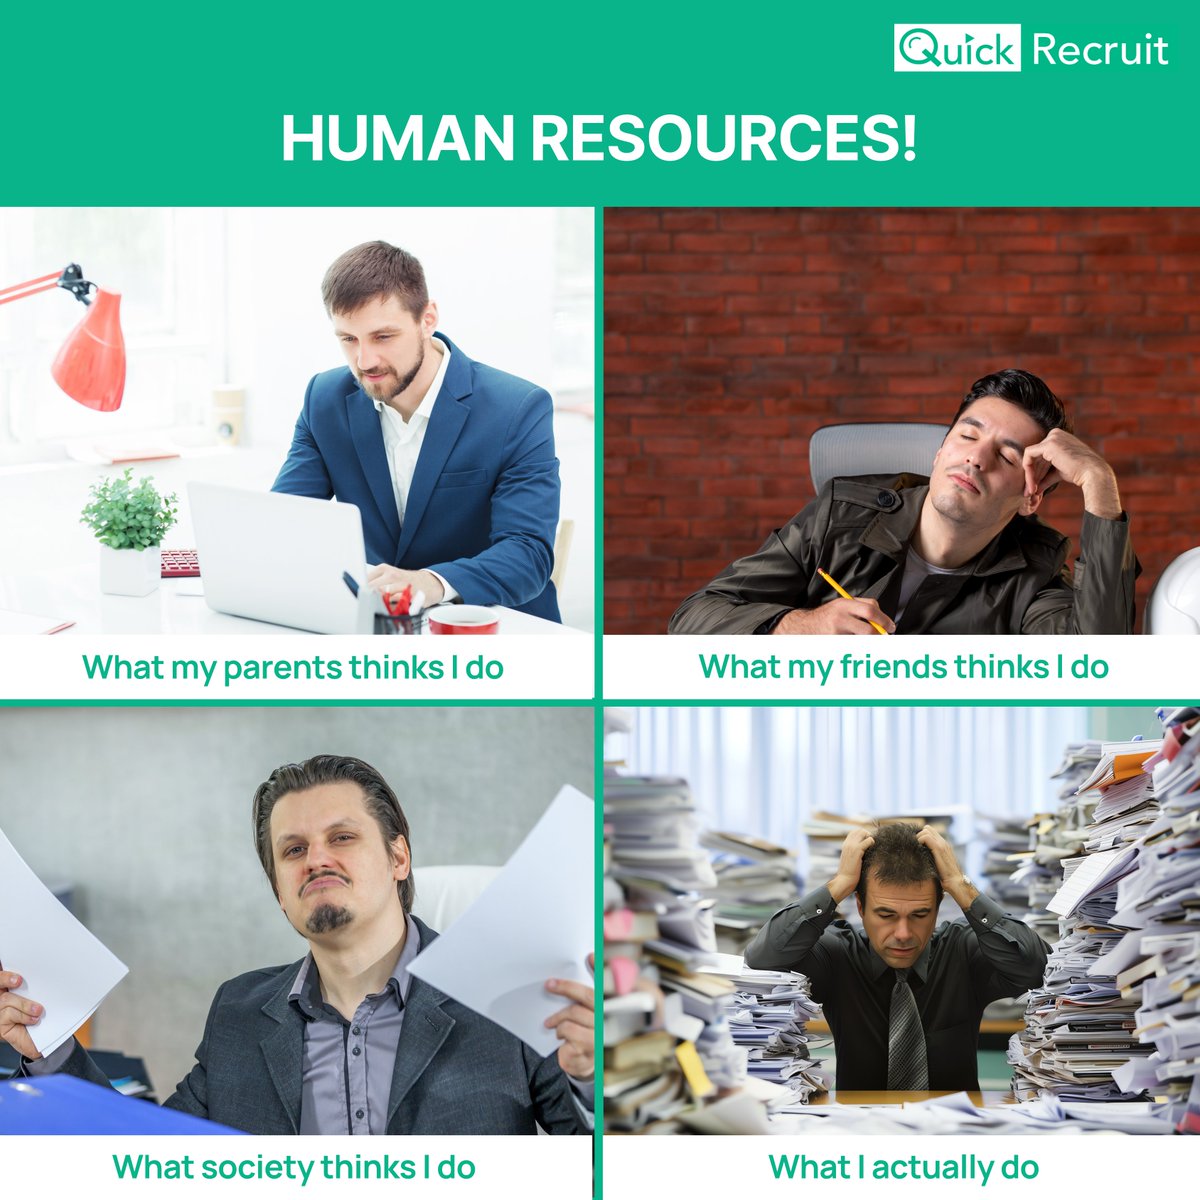 Are you struggling with hiring, posting management, and resume handling manually?

Unlock efficiency with our free tools: rb.gy/rhr8dl

#jobposting #hiringmanagement #recruitment #hiringprocess #jobpostingmanagement #interviewasaservice #virtualinterviews #quickrecruit